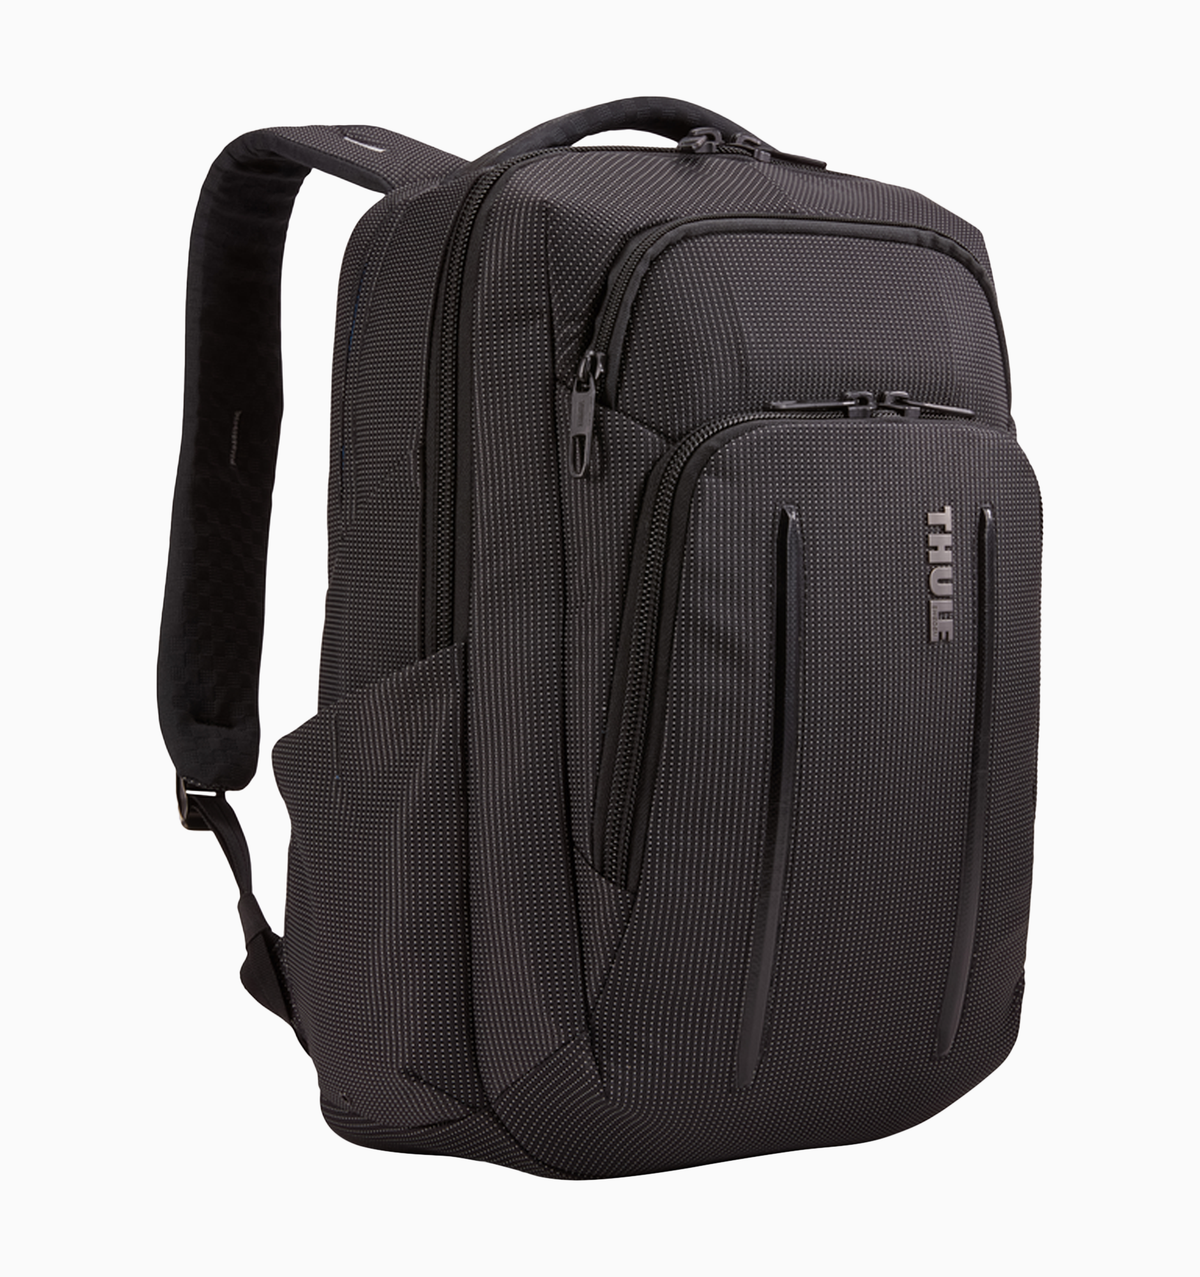 Thule - Crossover 2 - 14" Backpack 20L - Black